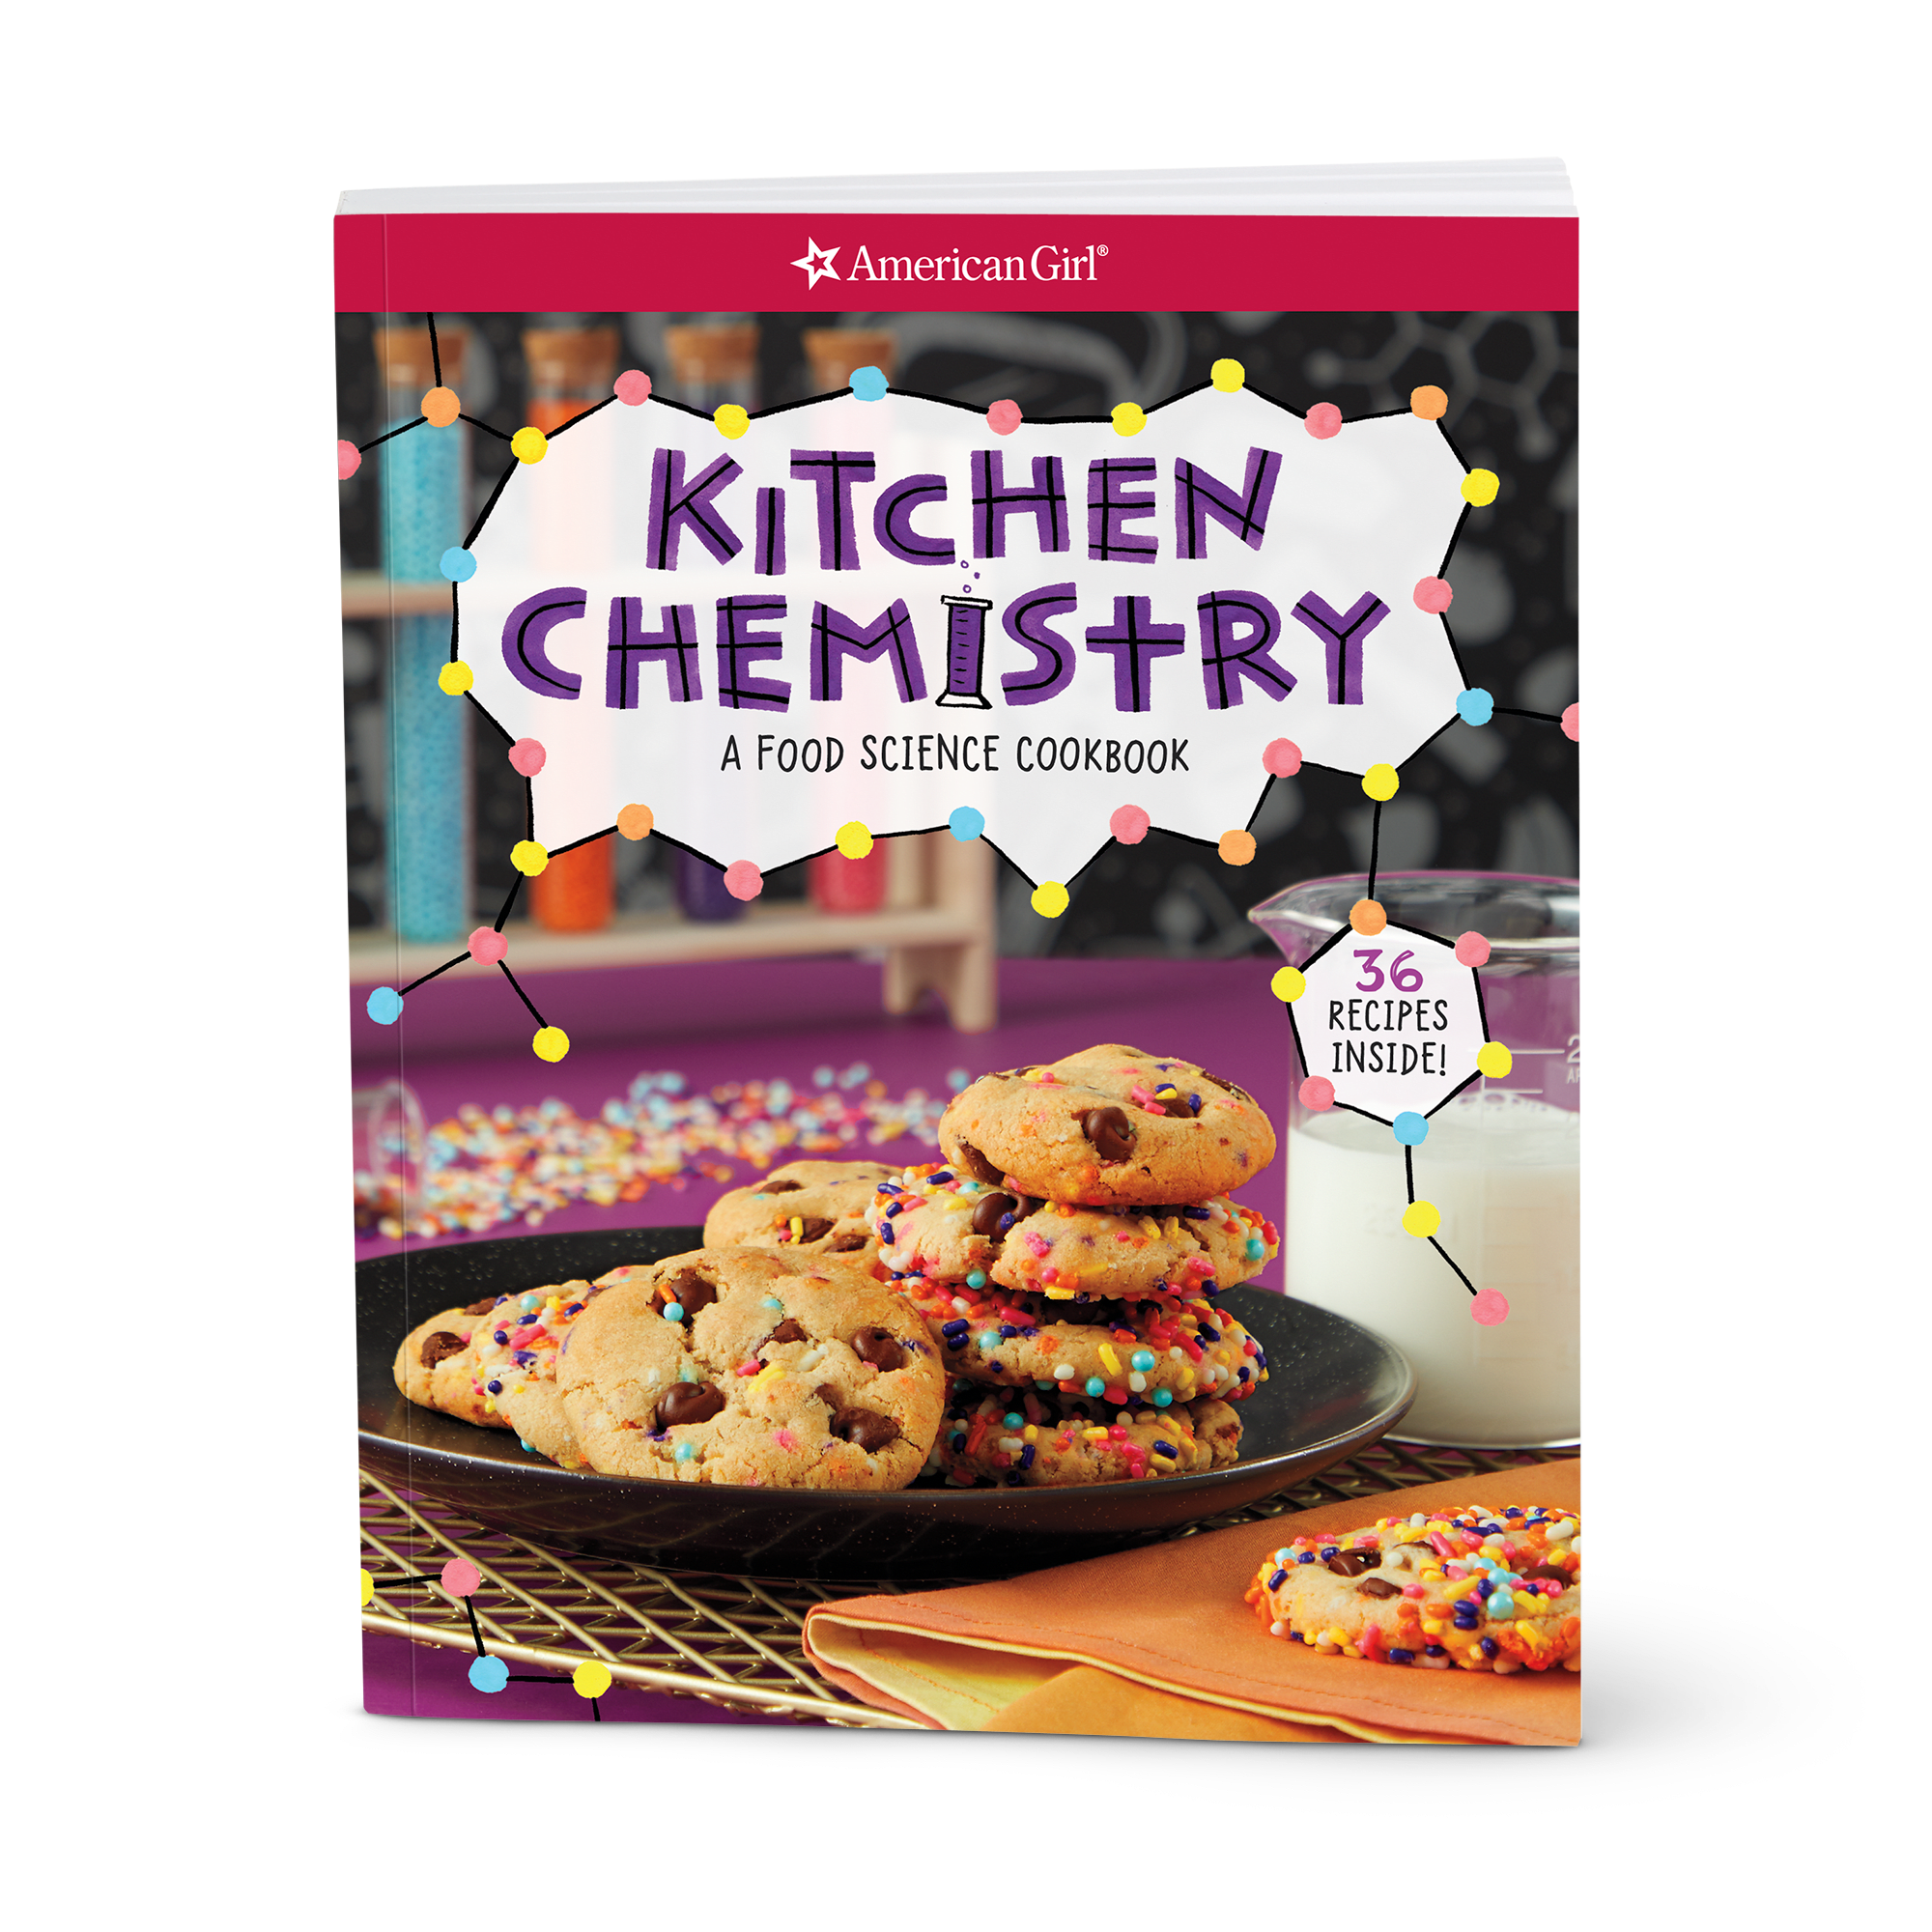 Kitchen Chemistry: A Food Science Cookbook [Book]